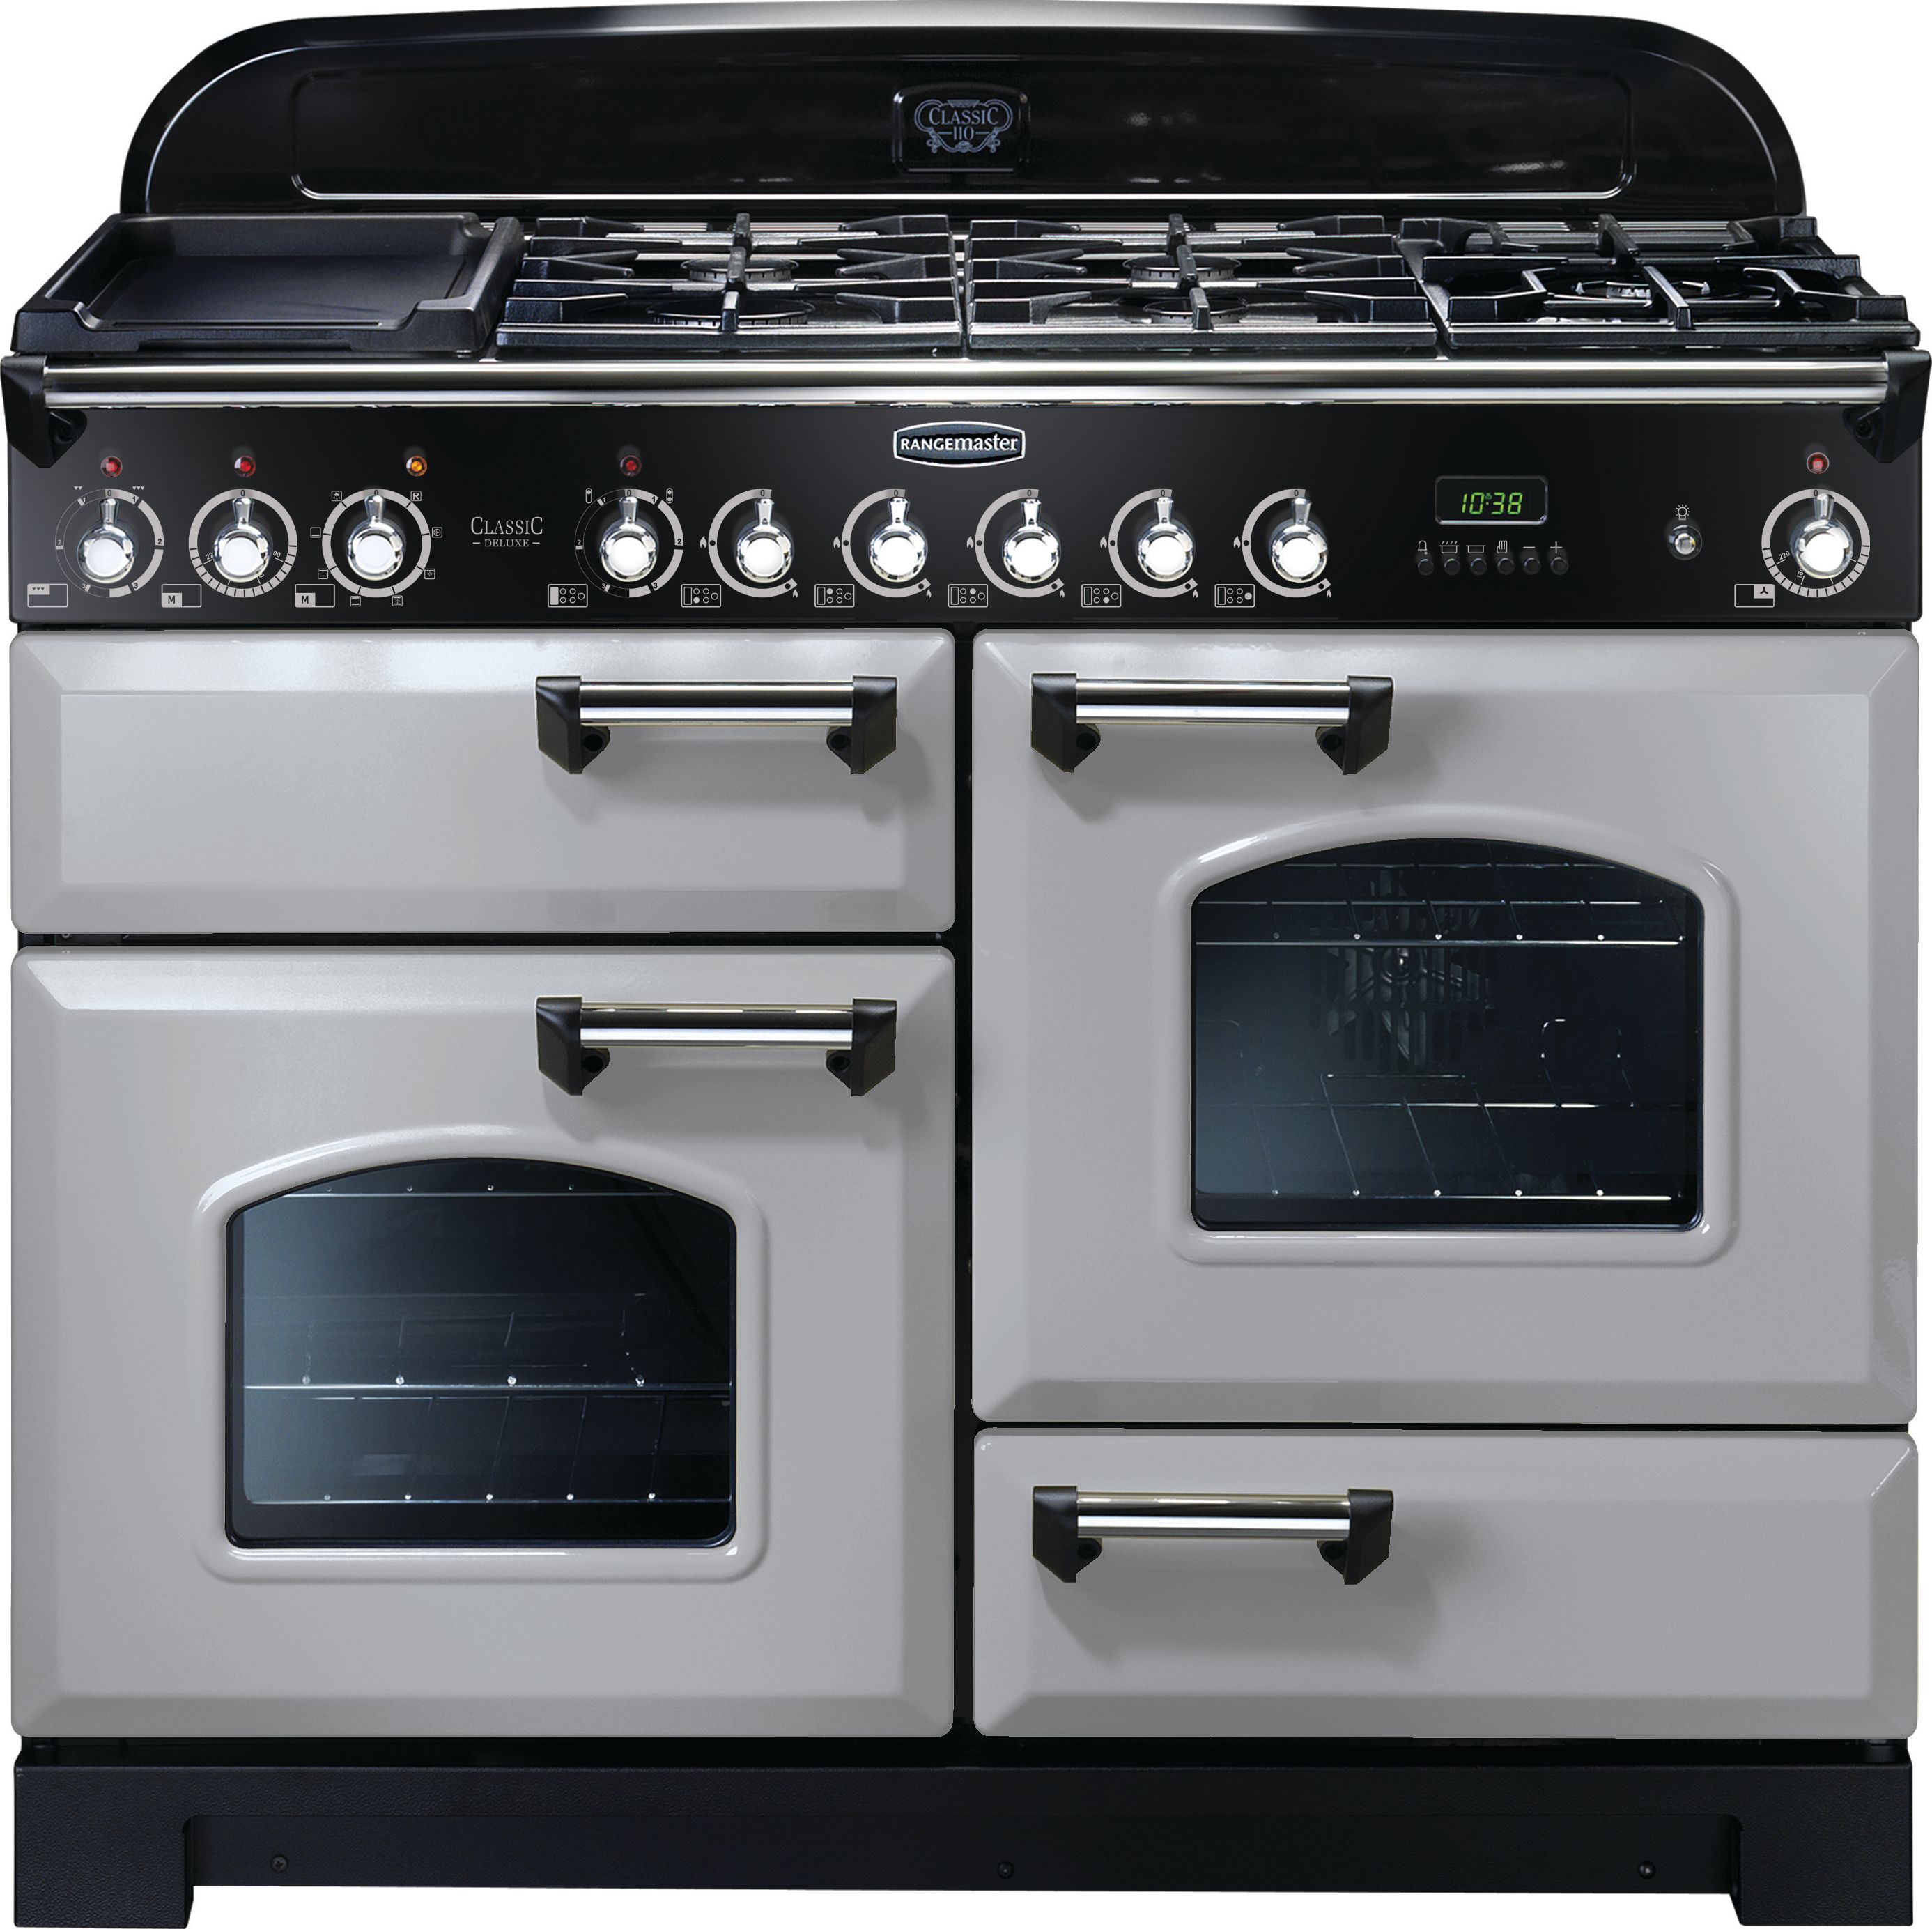 Rangemaster Classic Deluxe CDL110DFFRP/C 110cm Dual Fuel Range Cooker - Royal Pearl / Chrome - A/A Rated, Grey